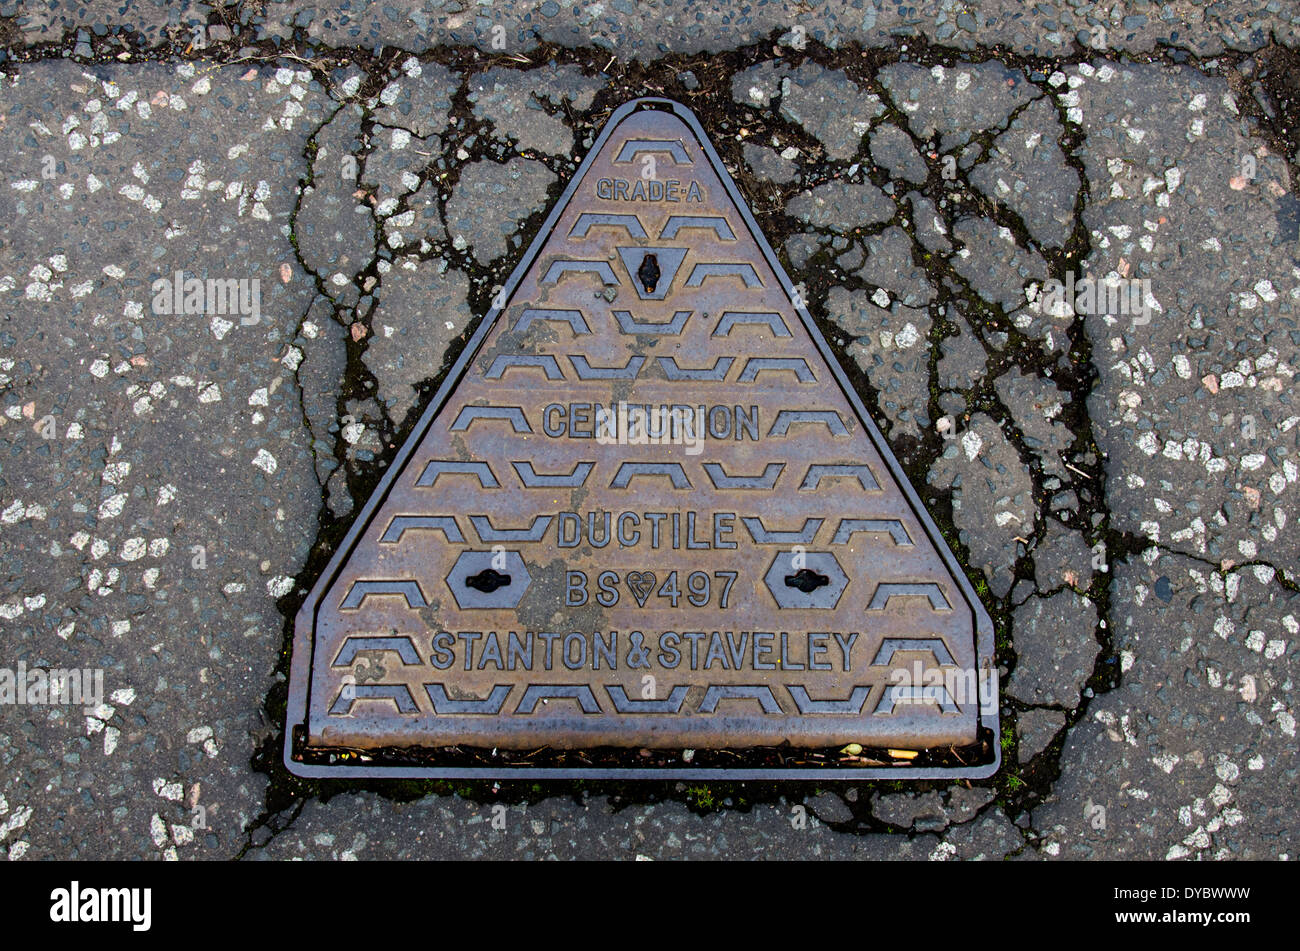 An example of a Centurion Ductile manhole cover made by Stanton and Staveley ironworks. Stock Photo